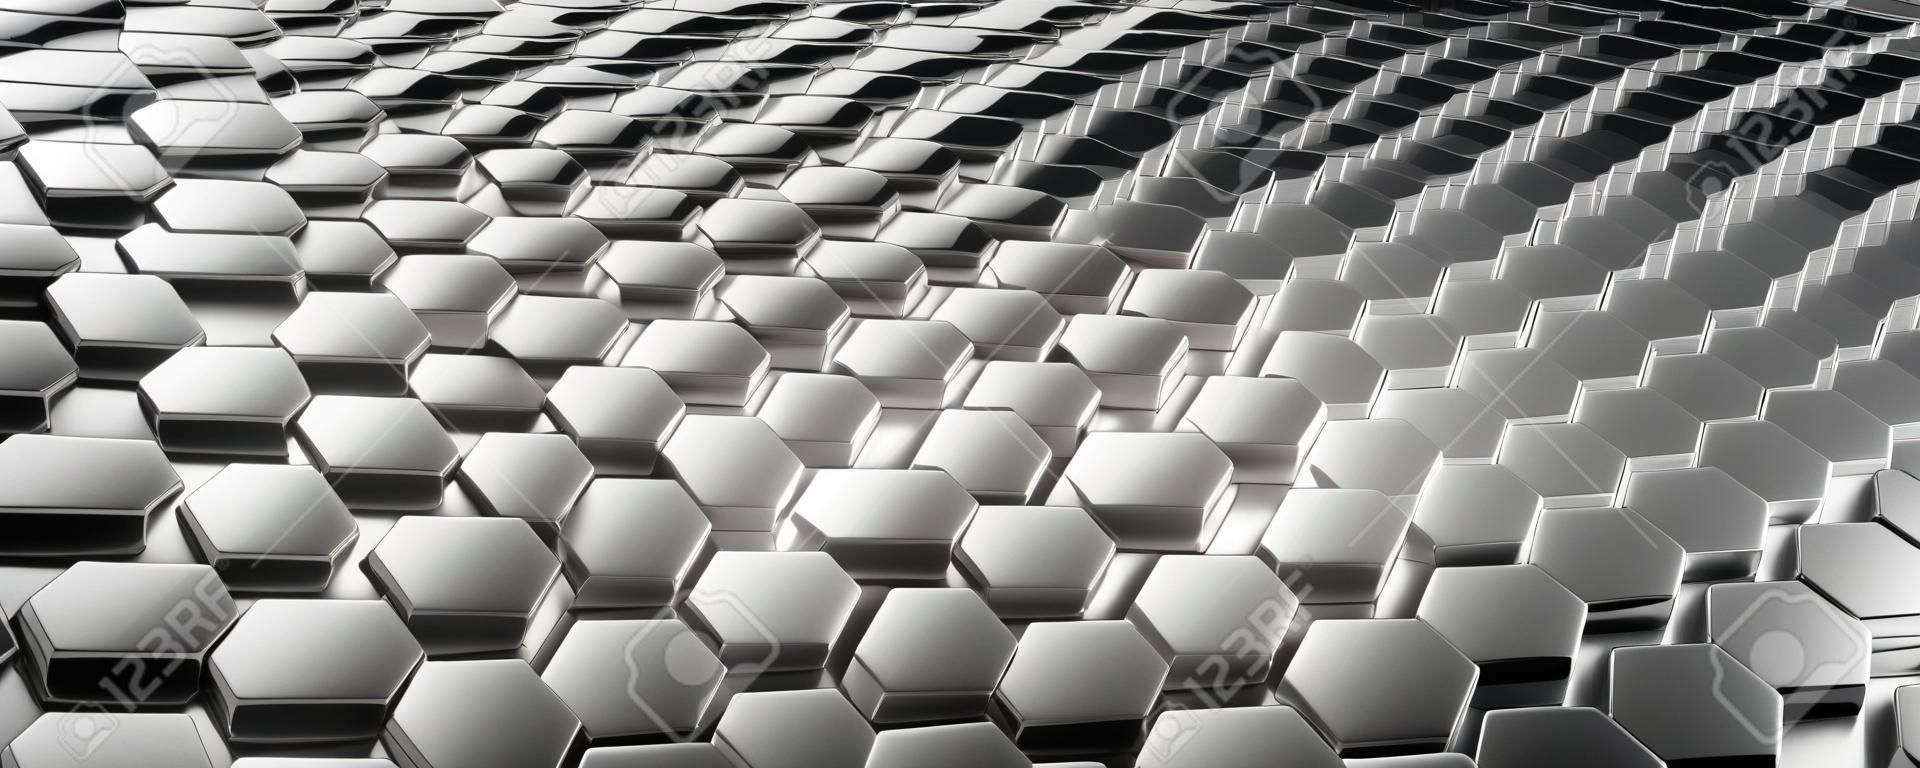 Abstract Silver metallic of futuristic surface cube pattern with light rays. Silver metallic tint hexagonal background. wide banner. 3d illustration